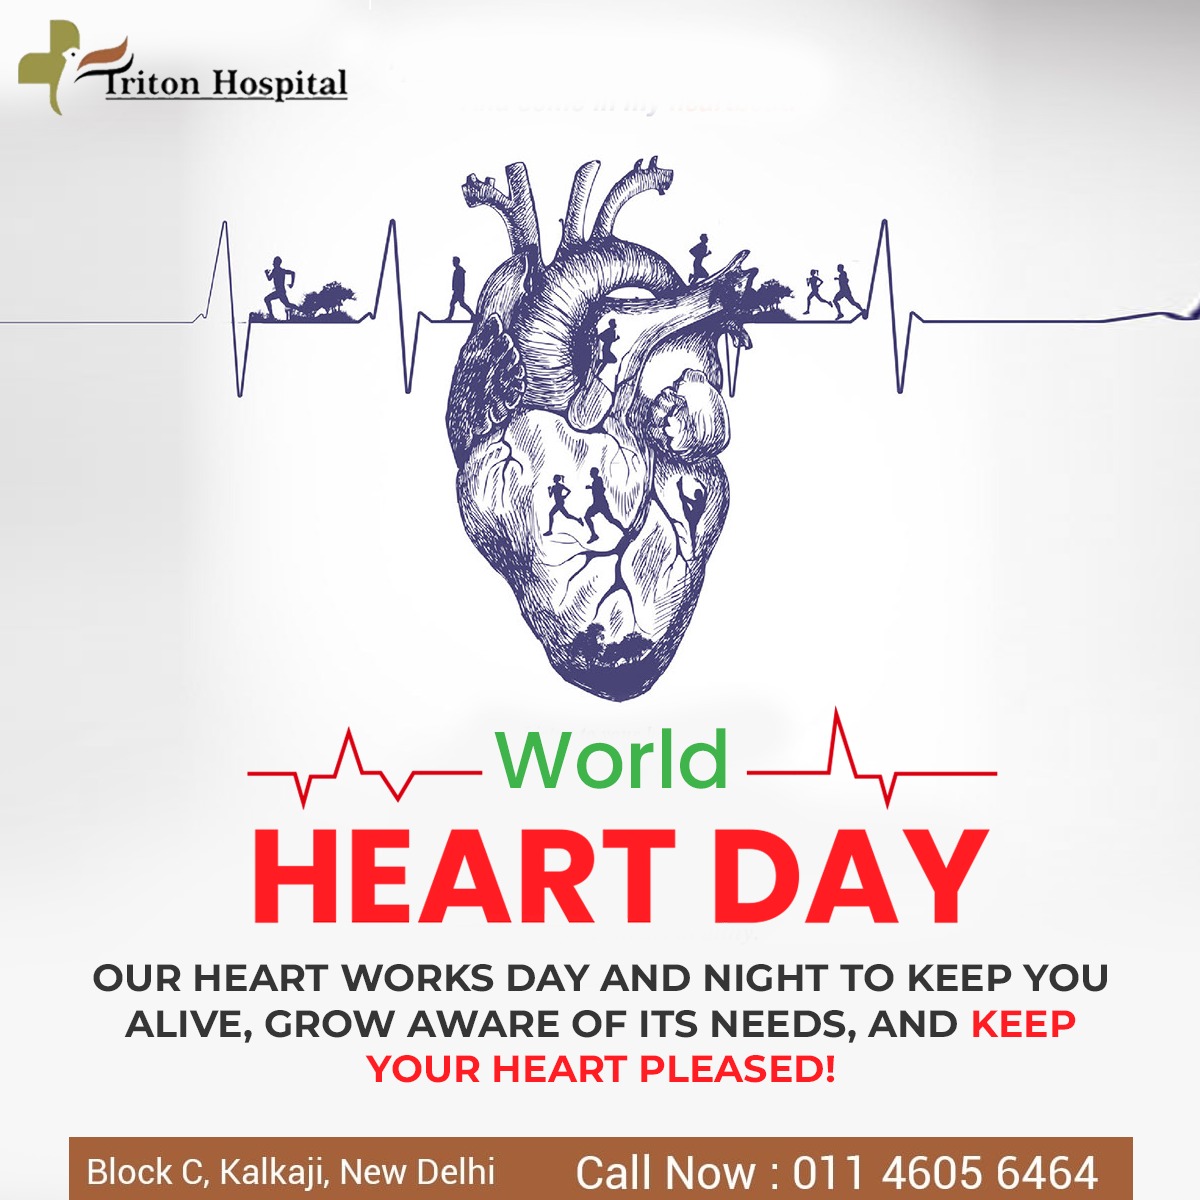 Keeping a healthy heart is essential if you don’t want to be apart from your loved ones. 
.
Happy World Heart Day.
.
.
.
#WorldHeartDay #TritonHospital #BestHospitalinDelhi #HospitalInDelhi #MultispecialtyHospitalInDelhi #newlife #consultation #Medicare